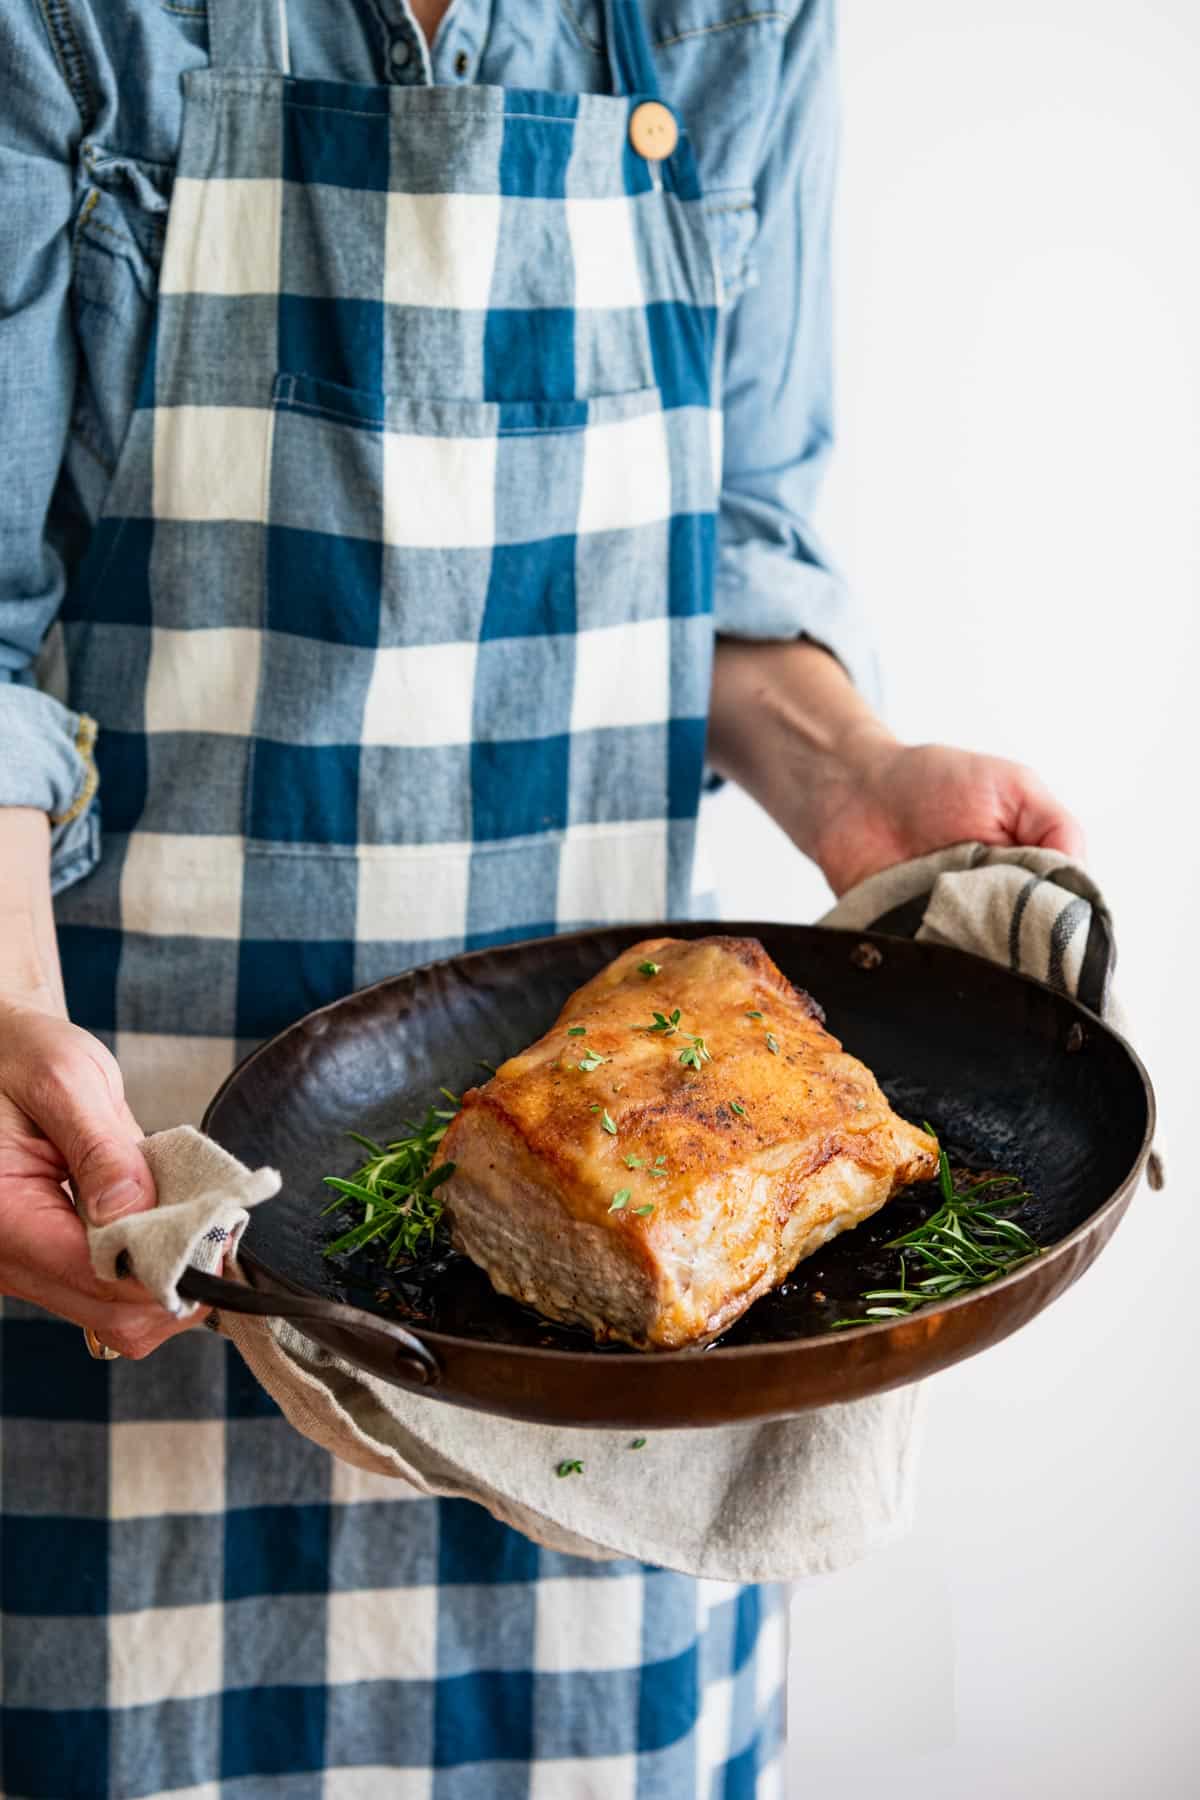 Cook in a blue and white apron holding a cast iron pan with an oven roasted pork loin.